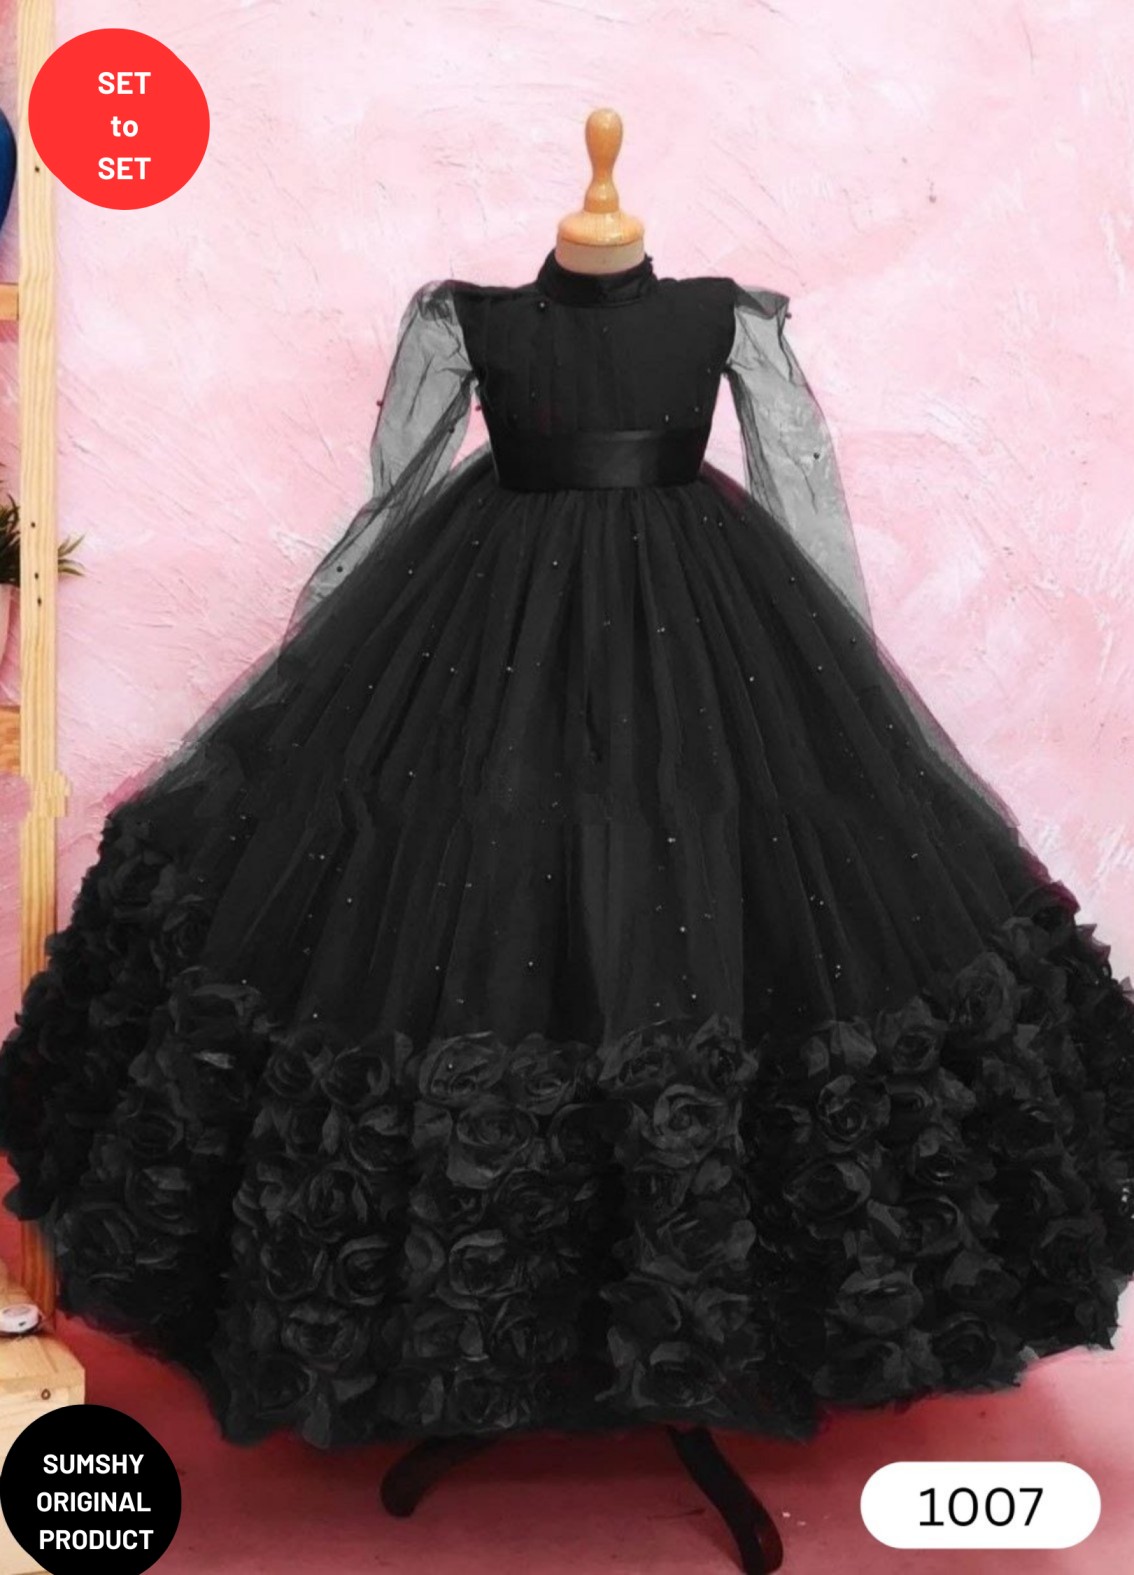 New Black Short Sleeve Lady Girl Women Princess Banquet Performance Ball  Prom Dress Gown Daily Wear Free Ship - Prom Dresses - AliExpress